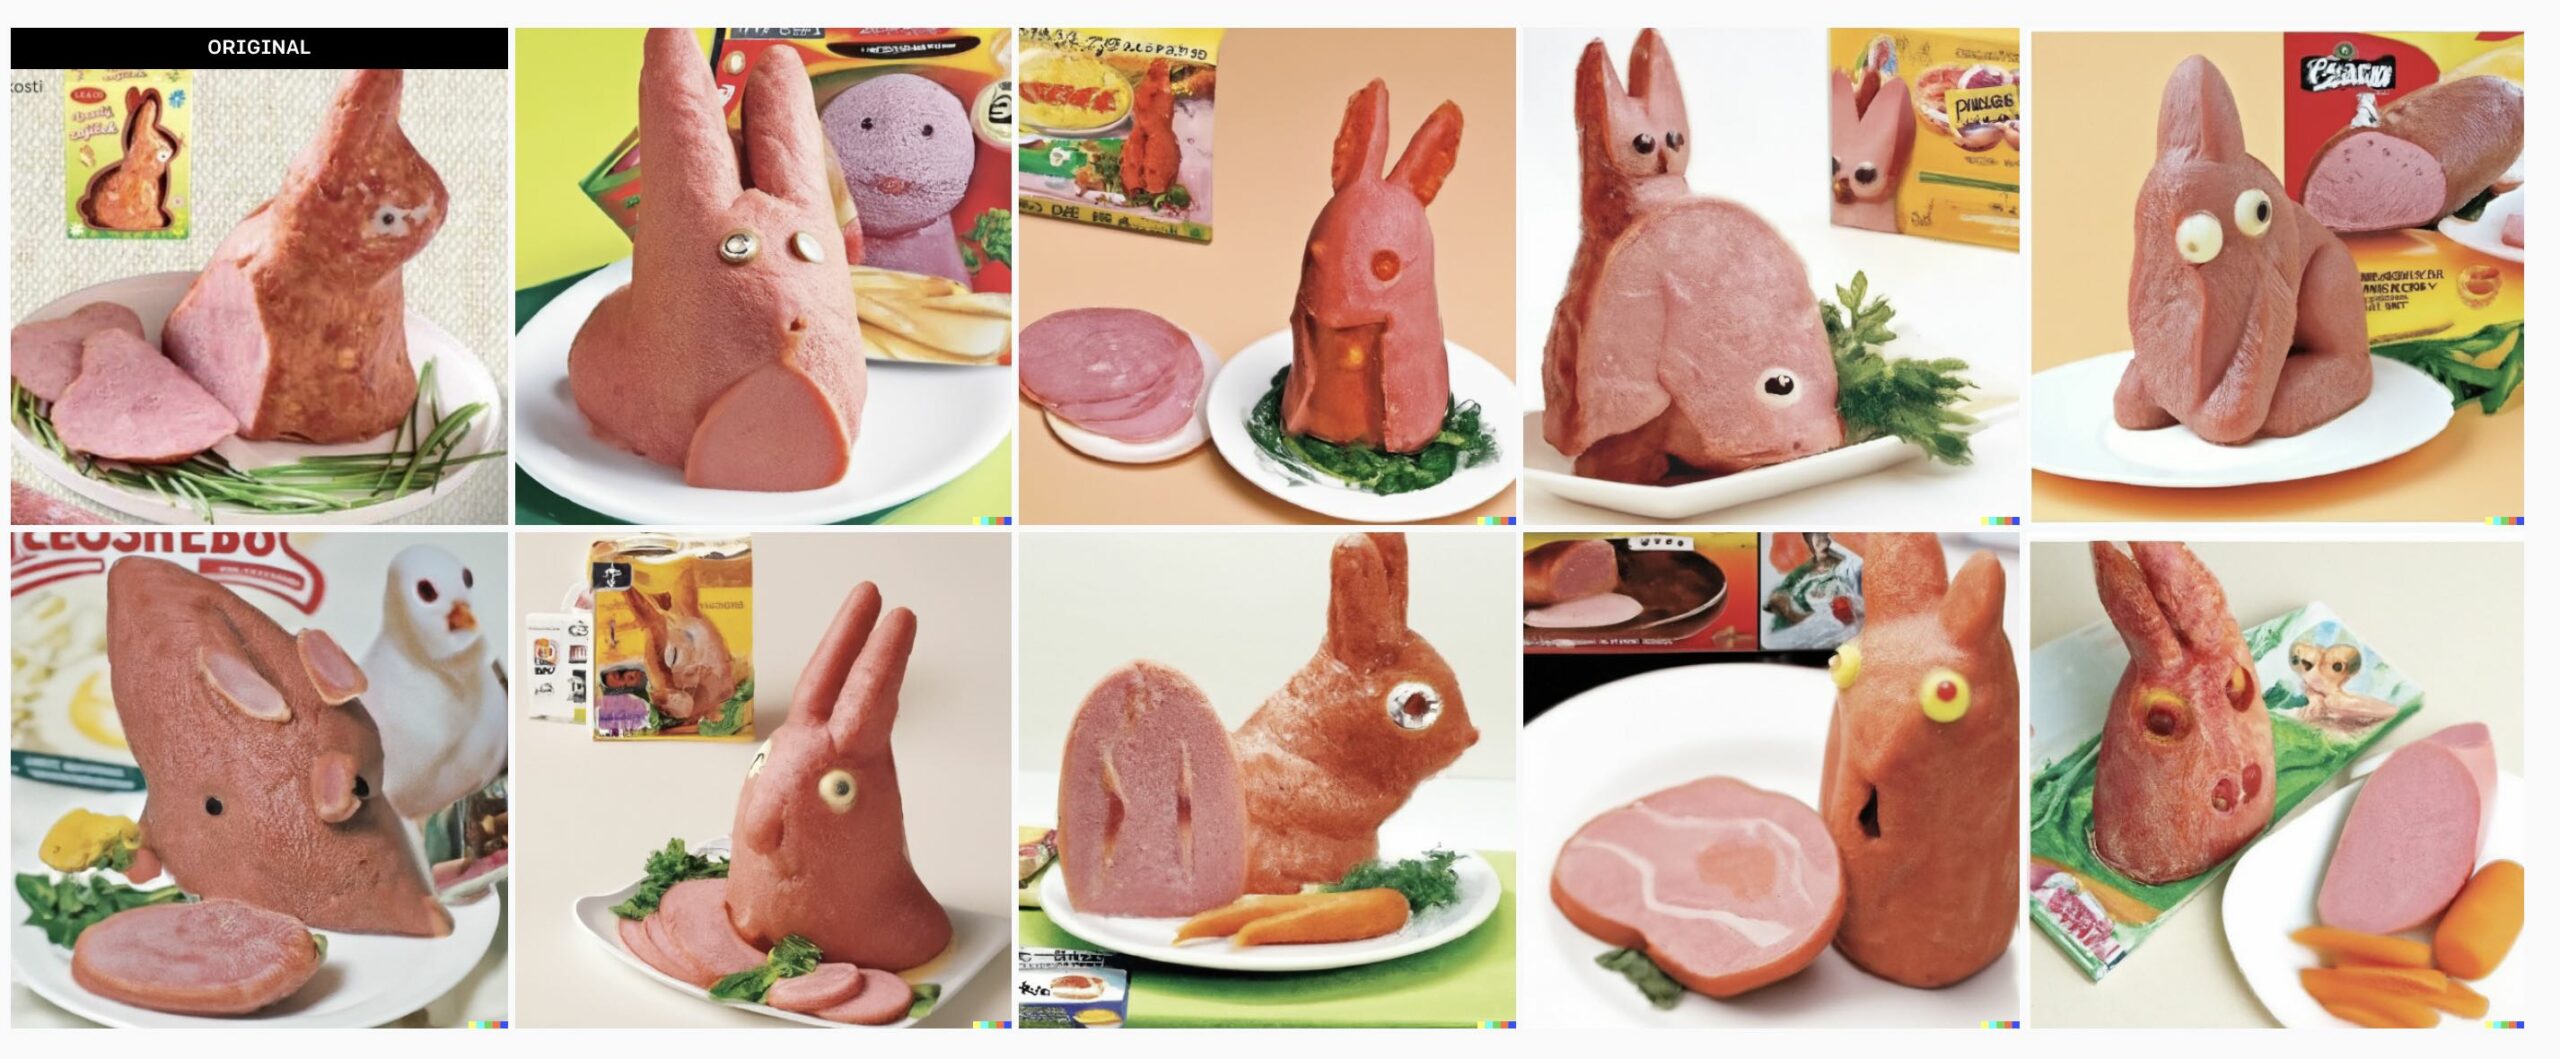 10 Images showing variations of a bunny made out of spam